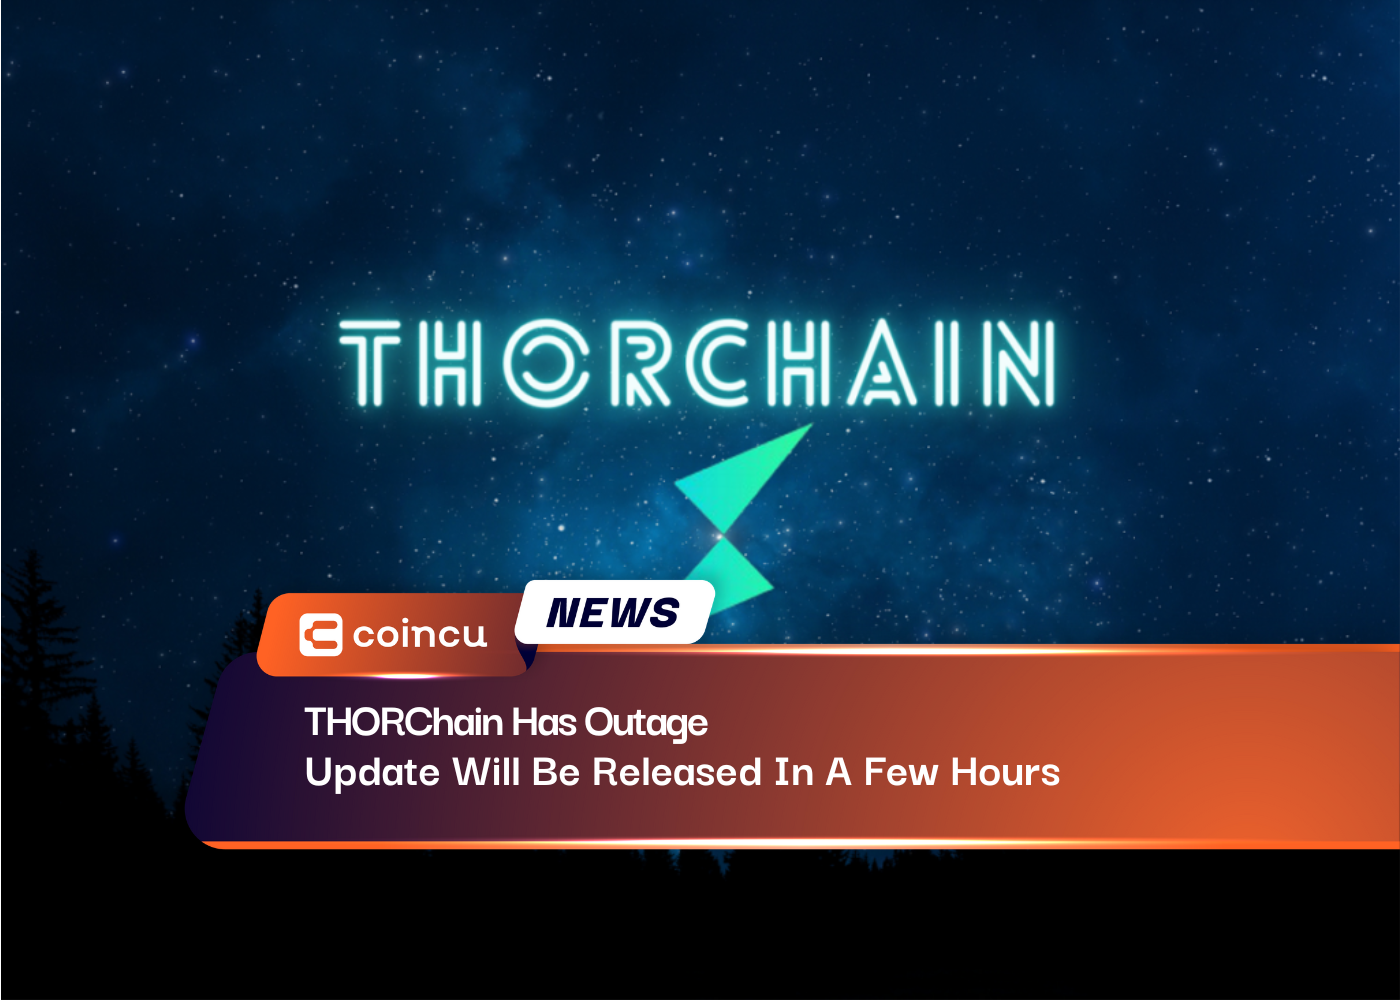 THORChain Has Outage, Update Will Be Released In A Few Hours